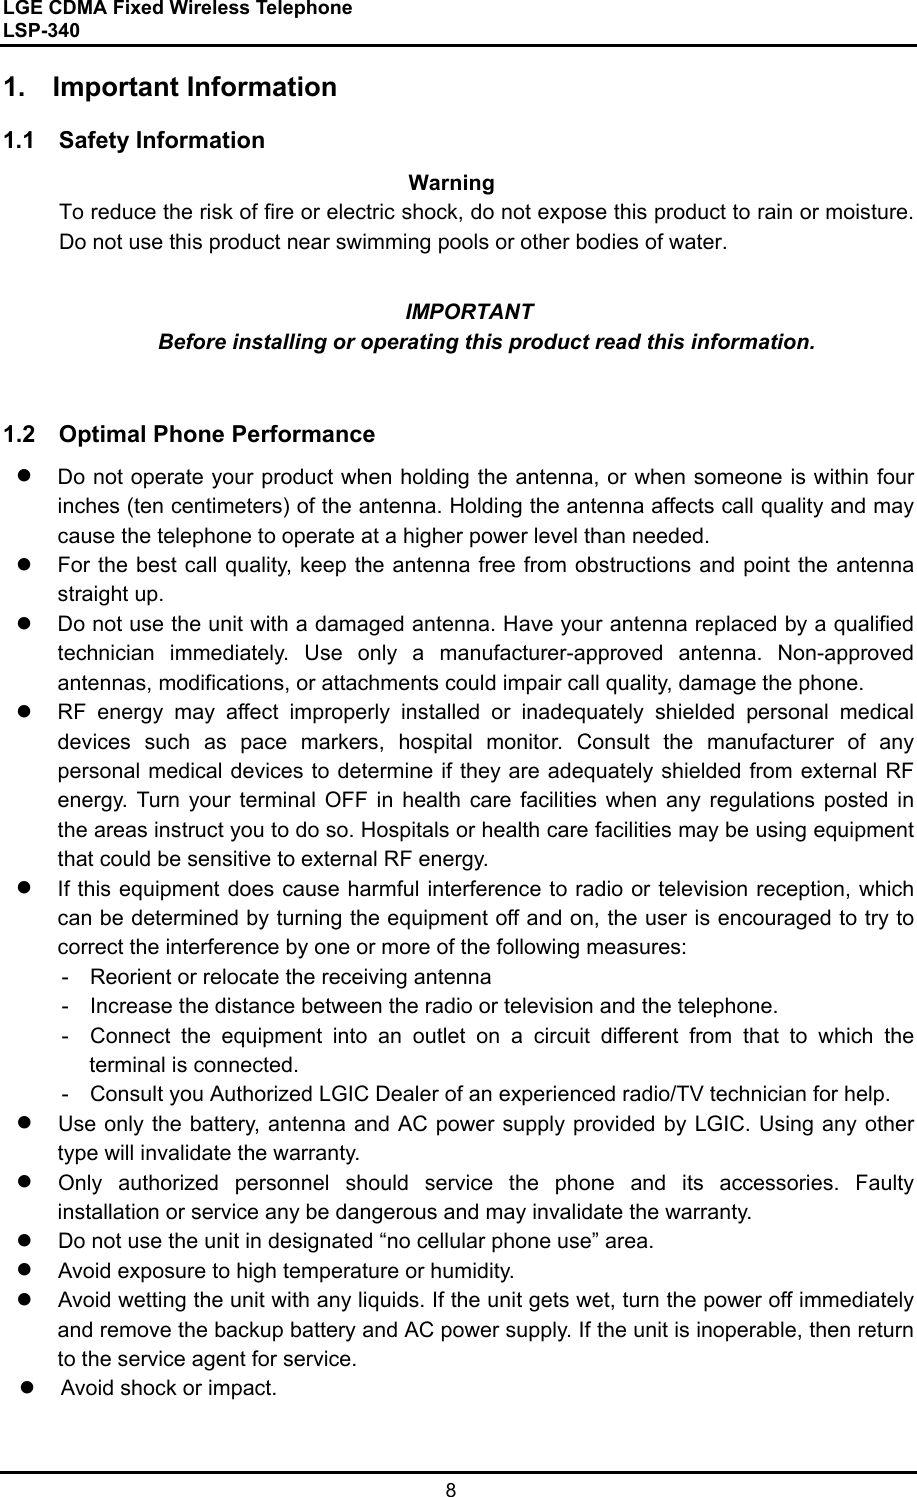 LGE CDMA Fixed Wireless Telephone                                       LSP-340     8  1. Important Information  1.1  Safety Information   Warning To reduce the risk of fire or electric shock, do not expose this product to rain or moisture. Do not use this product near swimming pools or other bodies of water.  IMPORTANT Before installing or operating this product read this information.   1.2  Optimal Phone Performance   Do not operate your product when holding the antenna, or when someone is within four inches (ten centimeters) of the antenna. Holding the antenna affects call quality and may cause the telephone to operate at a higher power level than needed.     For the best call quality, keep the antenna free from obstructions and point the antenna straight up.   Do not use the unit with a damaged antenna. Have your antenna replaced by a qualified technician immediately. Use only a manufacturer-approved antenna. Non-approved antennas, modifications, or attachments could impair call quality, damage the phone.   RF energy may affect improperly installed or inadequately shielded personal medical devices such as pace markers, hospital monitor. Consult the manufacturer of any personal medical devices to determine if they are adequately shielded from external RF energy. Turn your terminal OFF in health care facilities when any regulations posted in the areas instruct you to do so. Hospitals or health care facilities may be using equipment that could be sensitive to external RF energy.   If this equipment does cause harmful interference to radio or television reception, which can be determined by turning the equipment off and on, the user is encouraged to try to correct the interference by one or more of the following measures: -    Reorient or relocate the receiving antenna -    Increase the distance between the radio or television and the telephone. -  Connect the equipment into an outlet on a circuit different from that to which the             terminal is connected. -    Consult you Authorized LGIC Dealer of an experienced radio/TV technician for help.   Use only the battery, antenna and AC power supply provided by LGIC. Using any other type will invalidate the warranty.   Only authorized personnel should service the phone and its accessories. Faulty installation or service any be dangerous and may invalidate the warranty.   Do not use the unit in designated “no cellular phone use” area.   Avoid exposure to high temperature or humidity.   Avoid wetting the unit with any liquids. If the unit gets wet, turn the power off immediately and remove the backup battery and AC power supply. If the unit is inoperable, then return to the service agent for service.   Avoid shock or impact.  